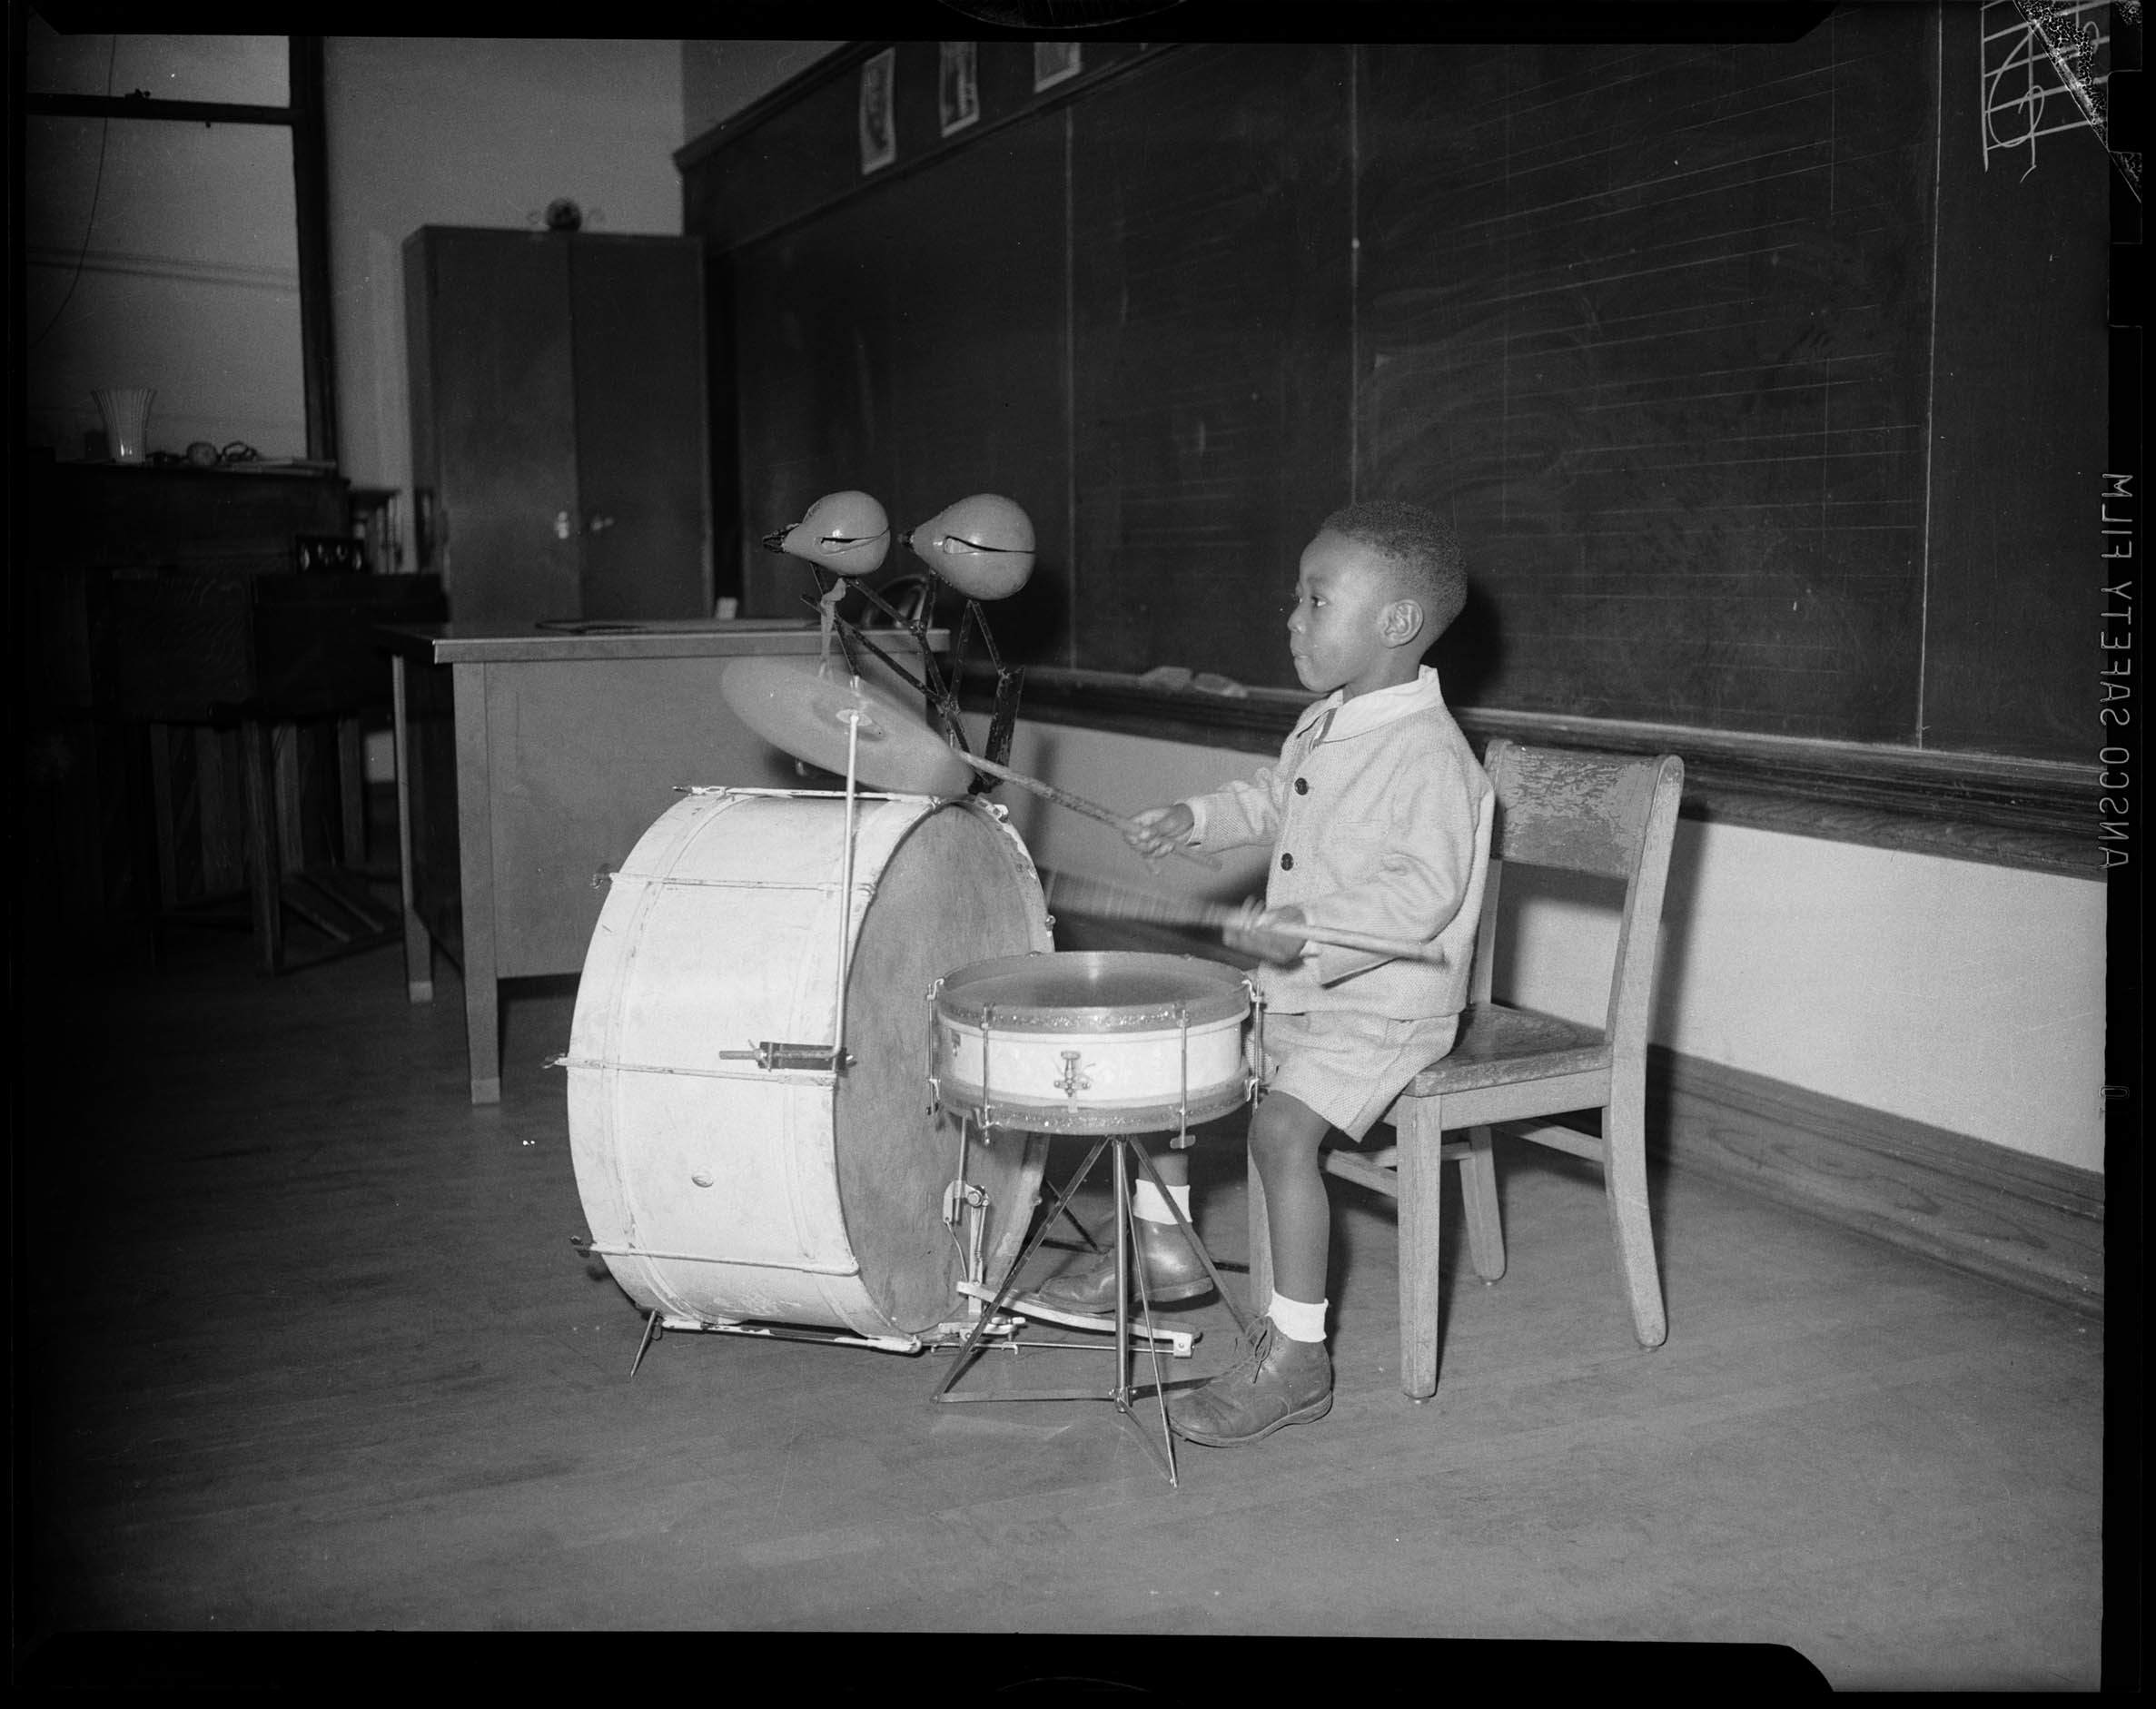 Charles Teenie Harris photo depicts a small boy playing the drums